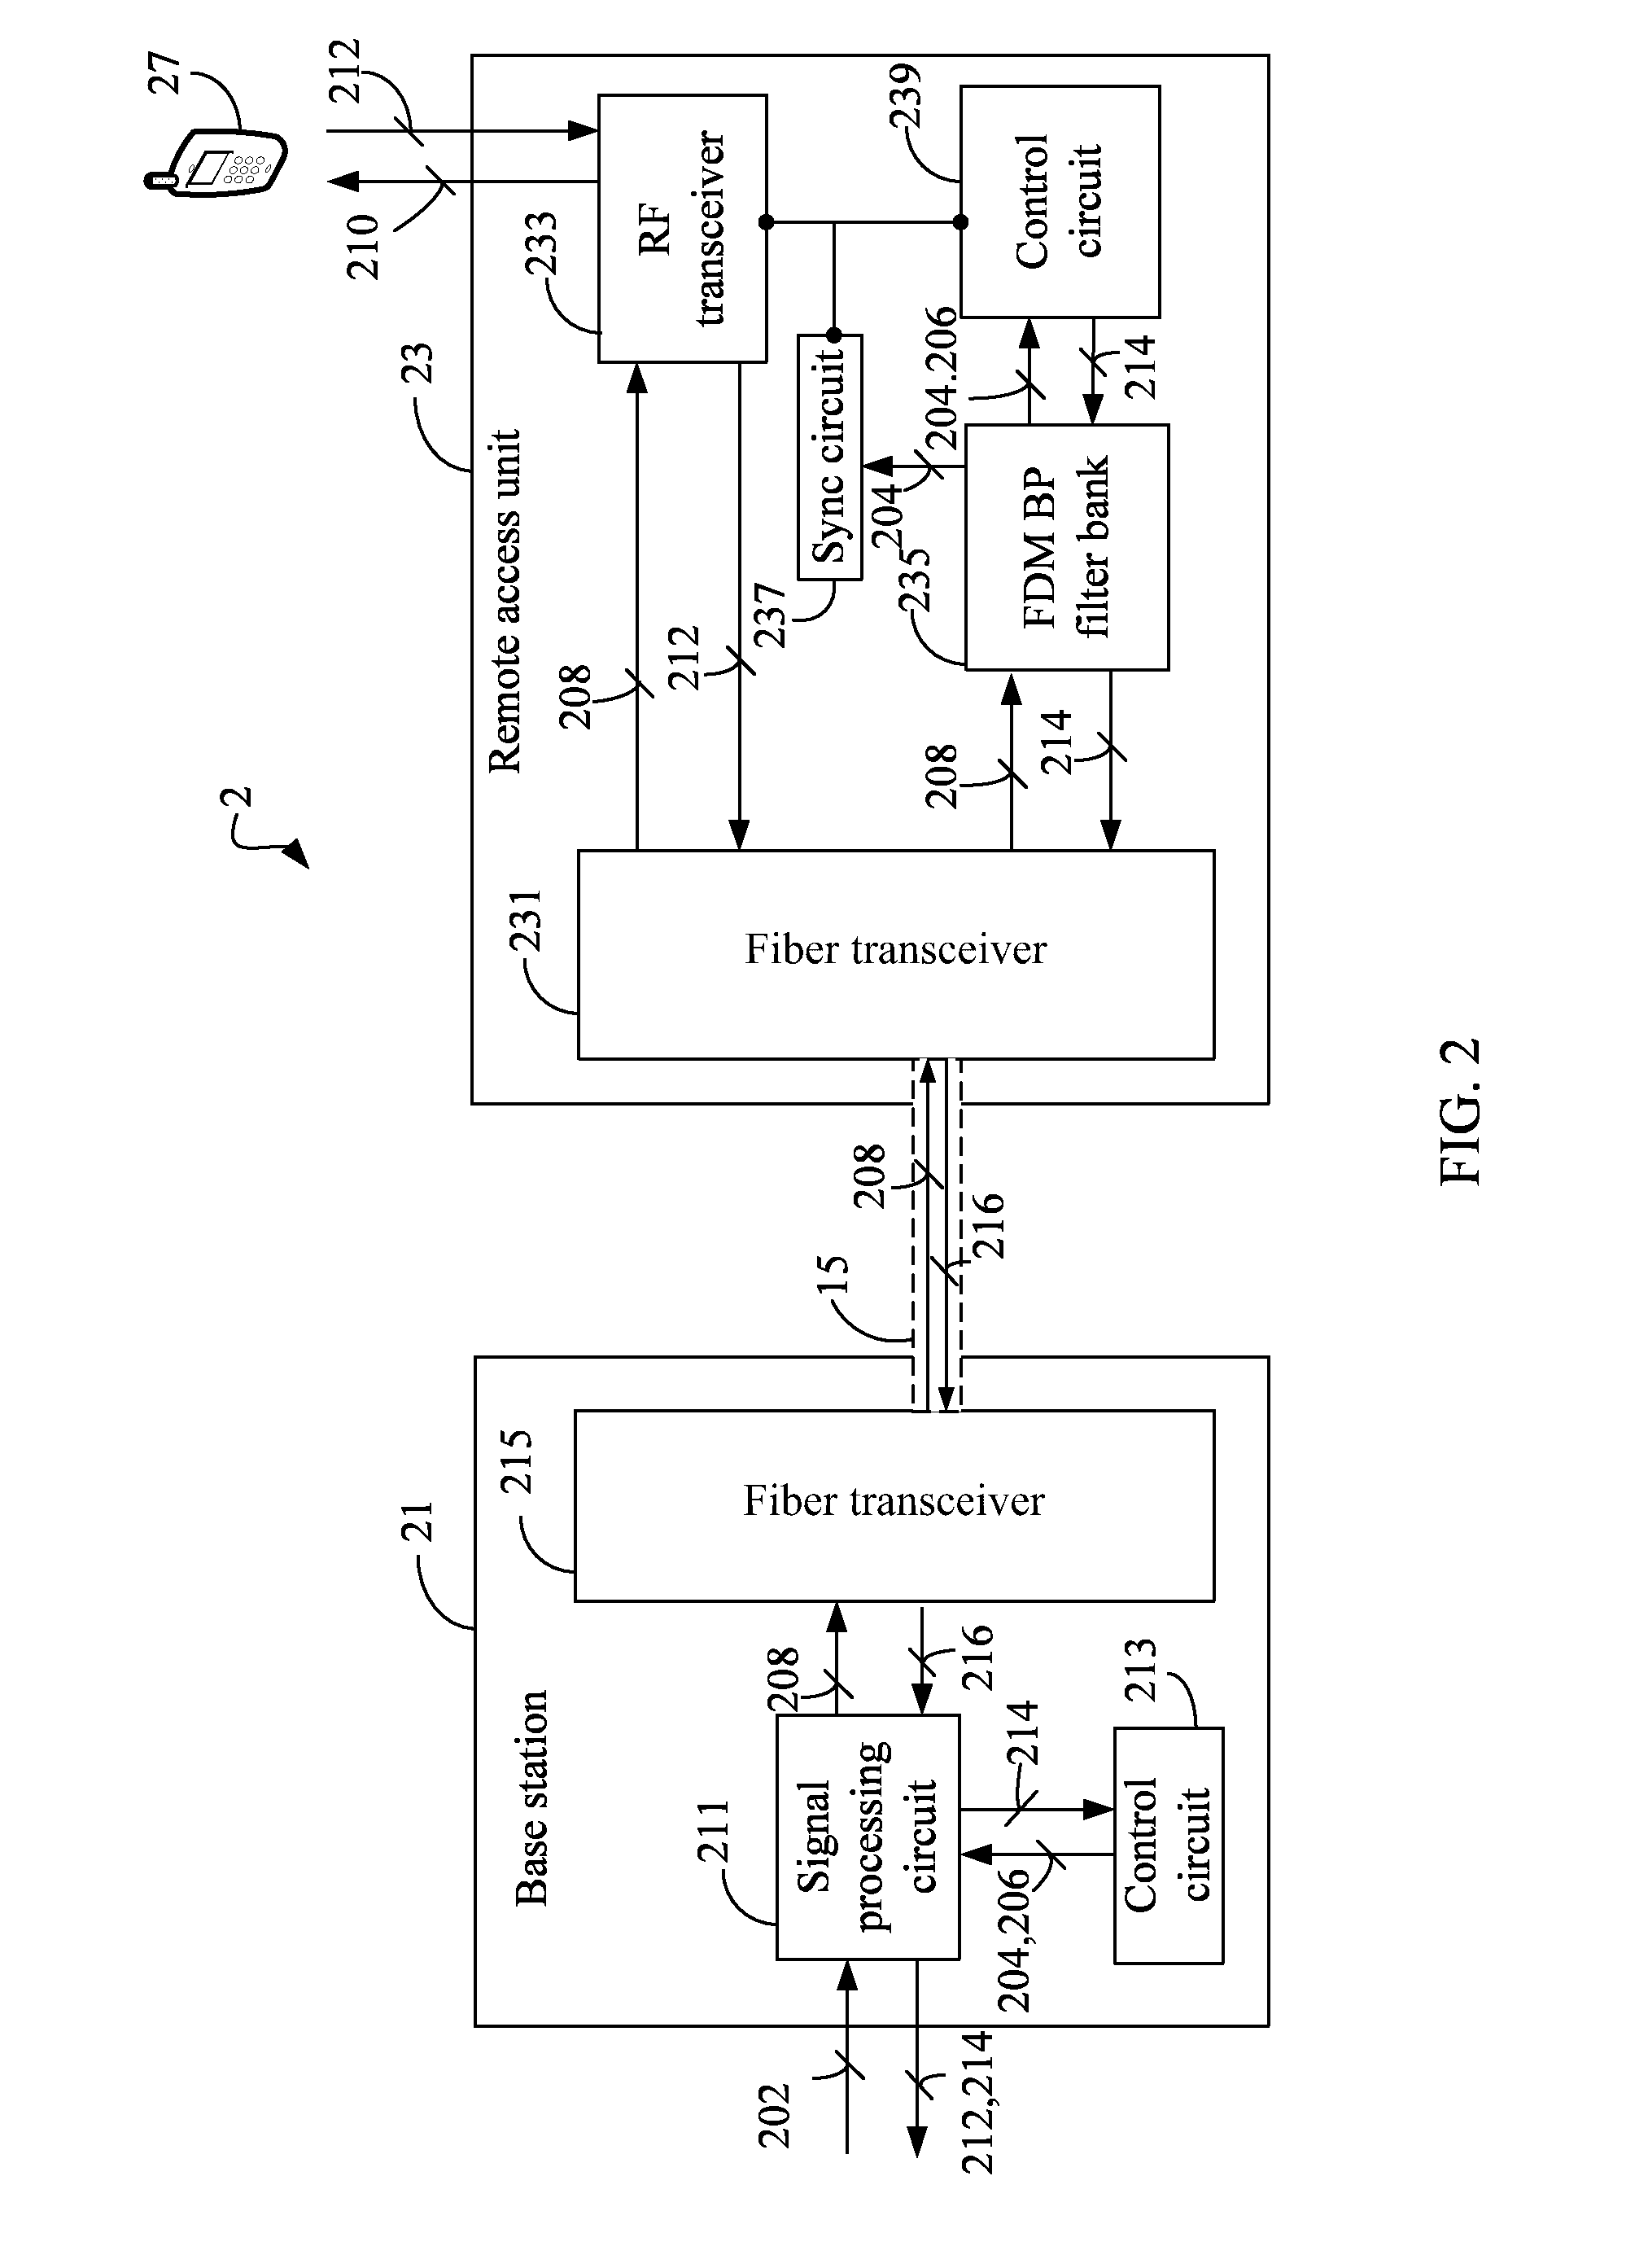 Time division duplex orthogonal frequency division multiplexing distributed antenna system, base station and remote access unit